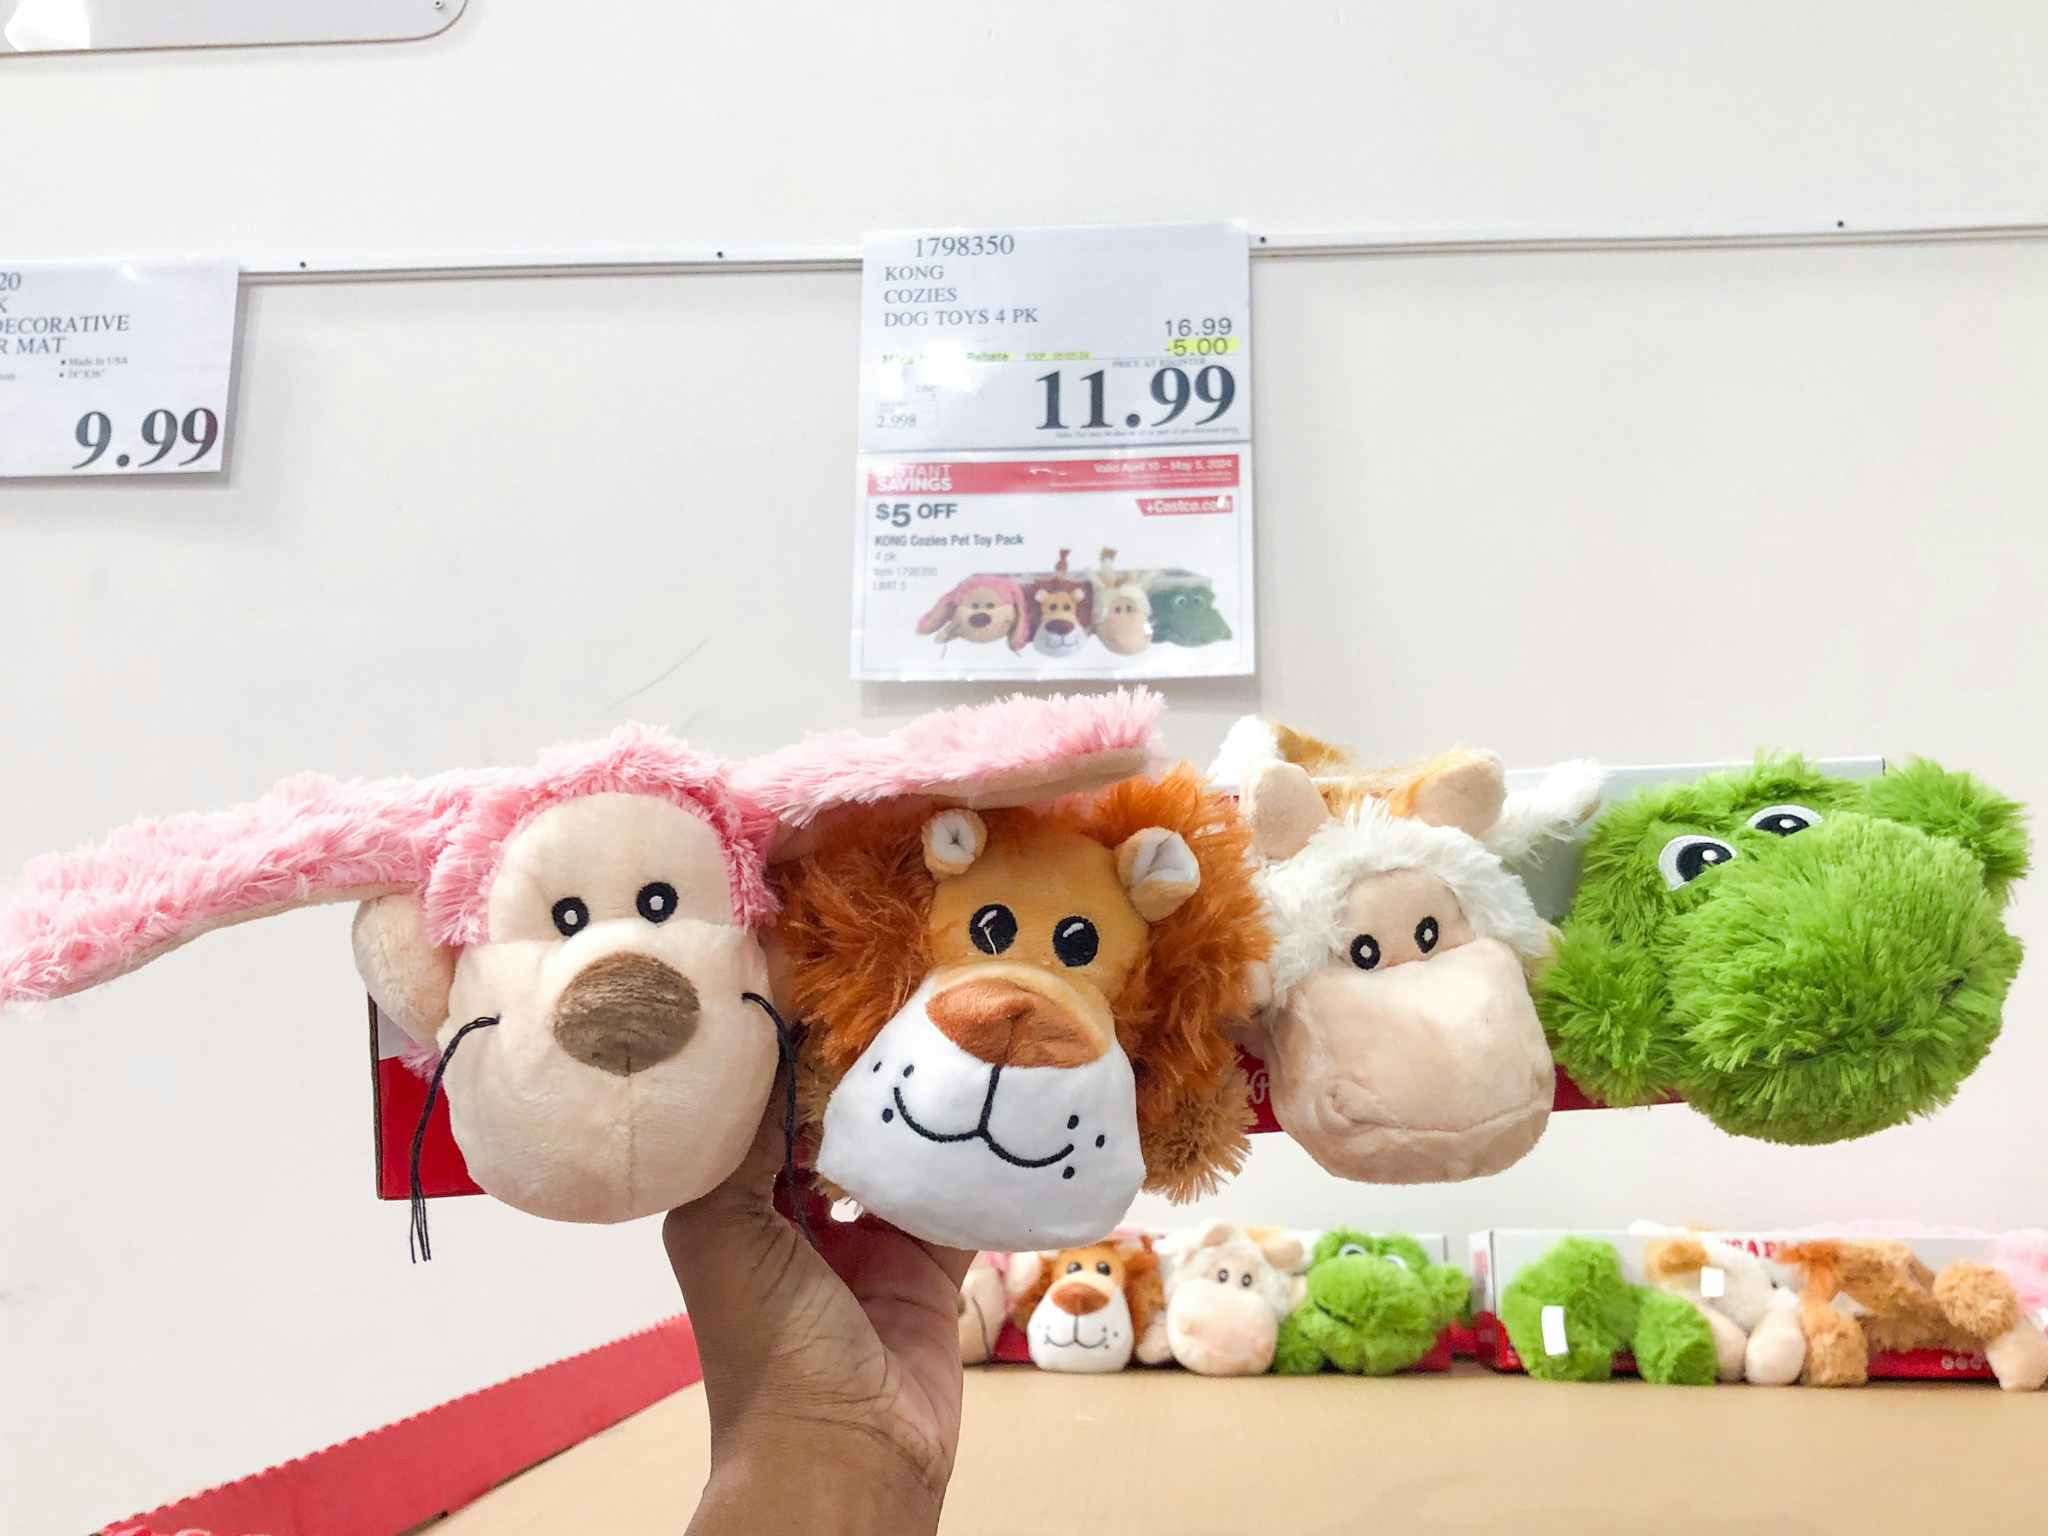 costco kong cozies play pack dog toys 4 pack 1